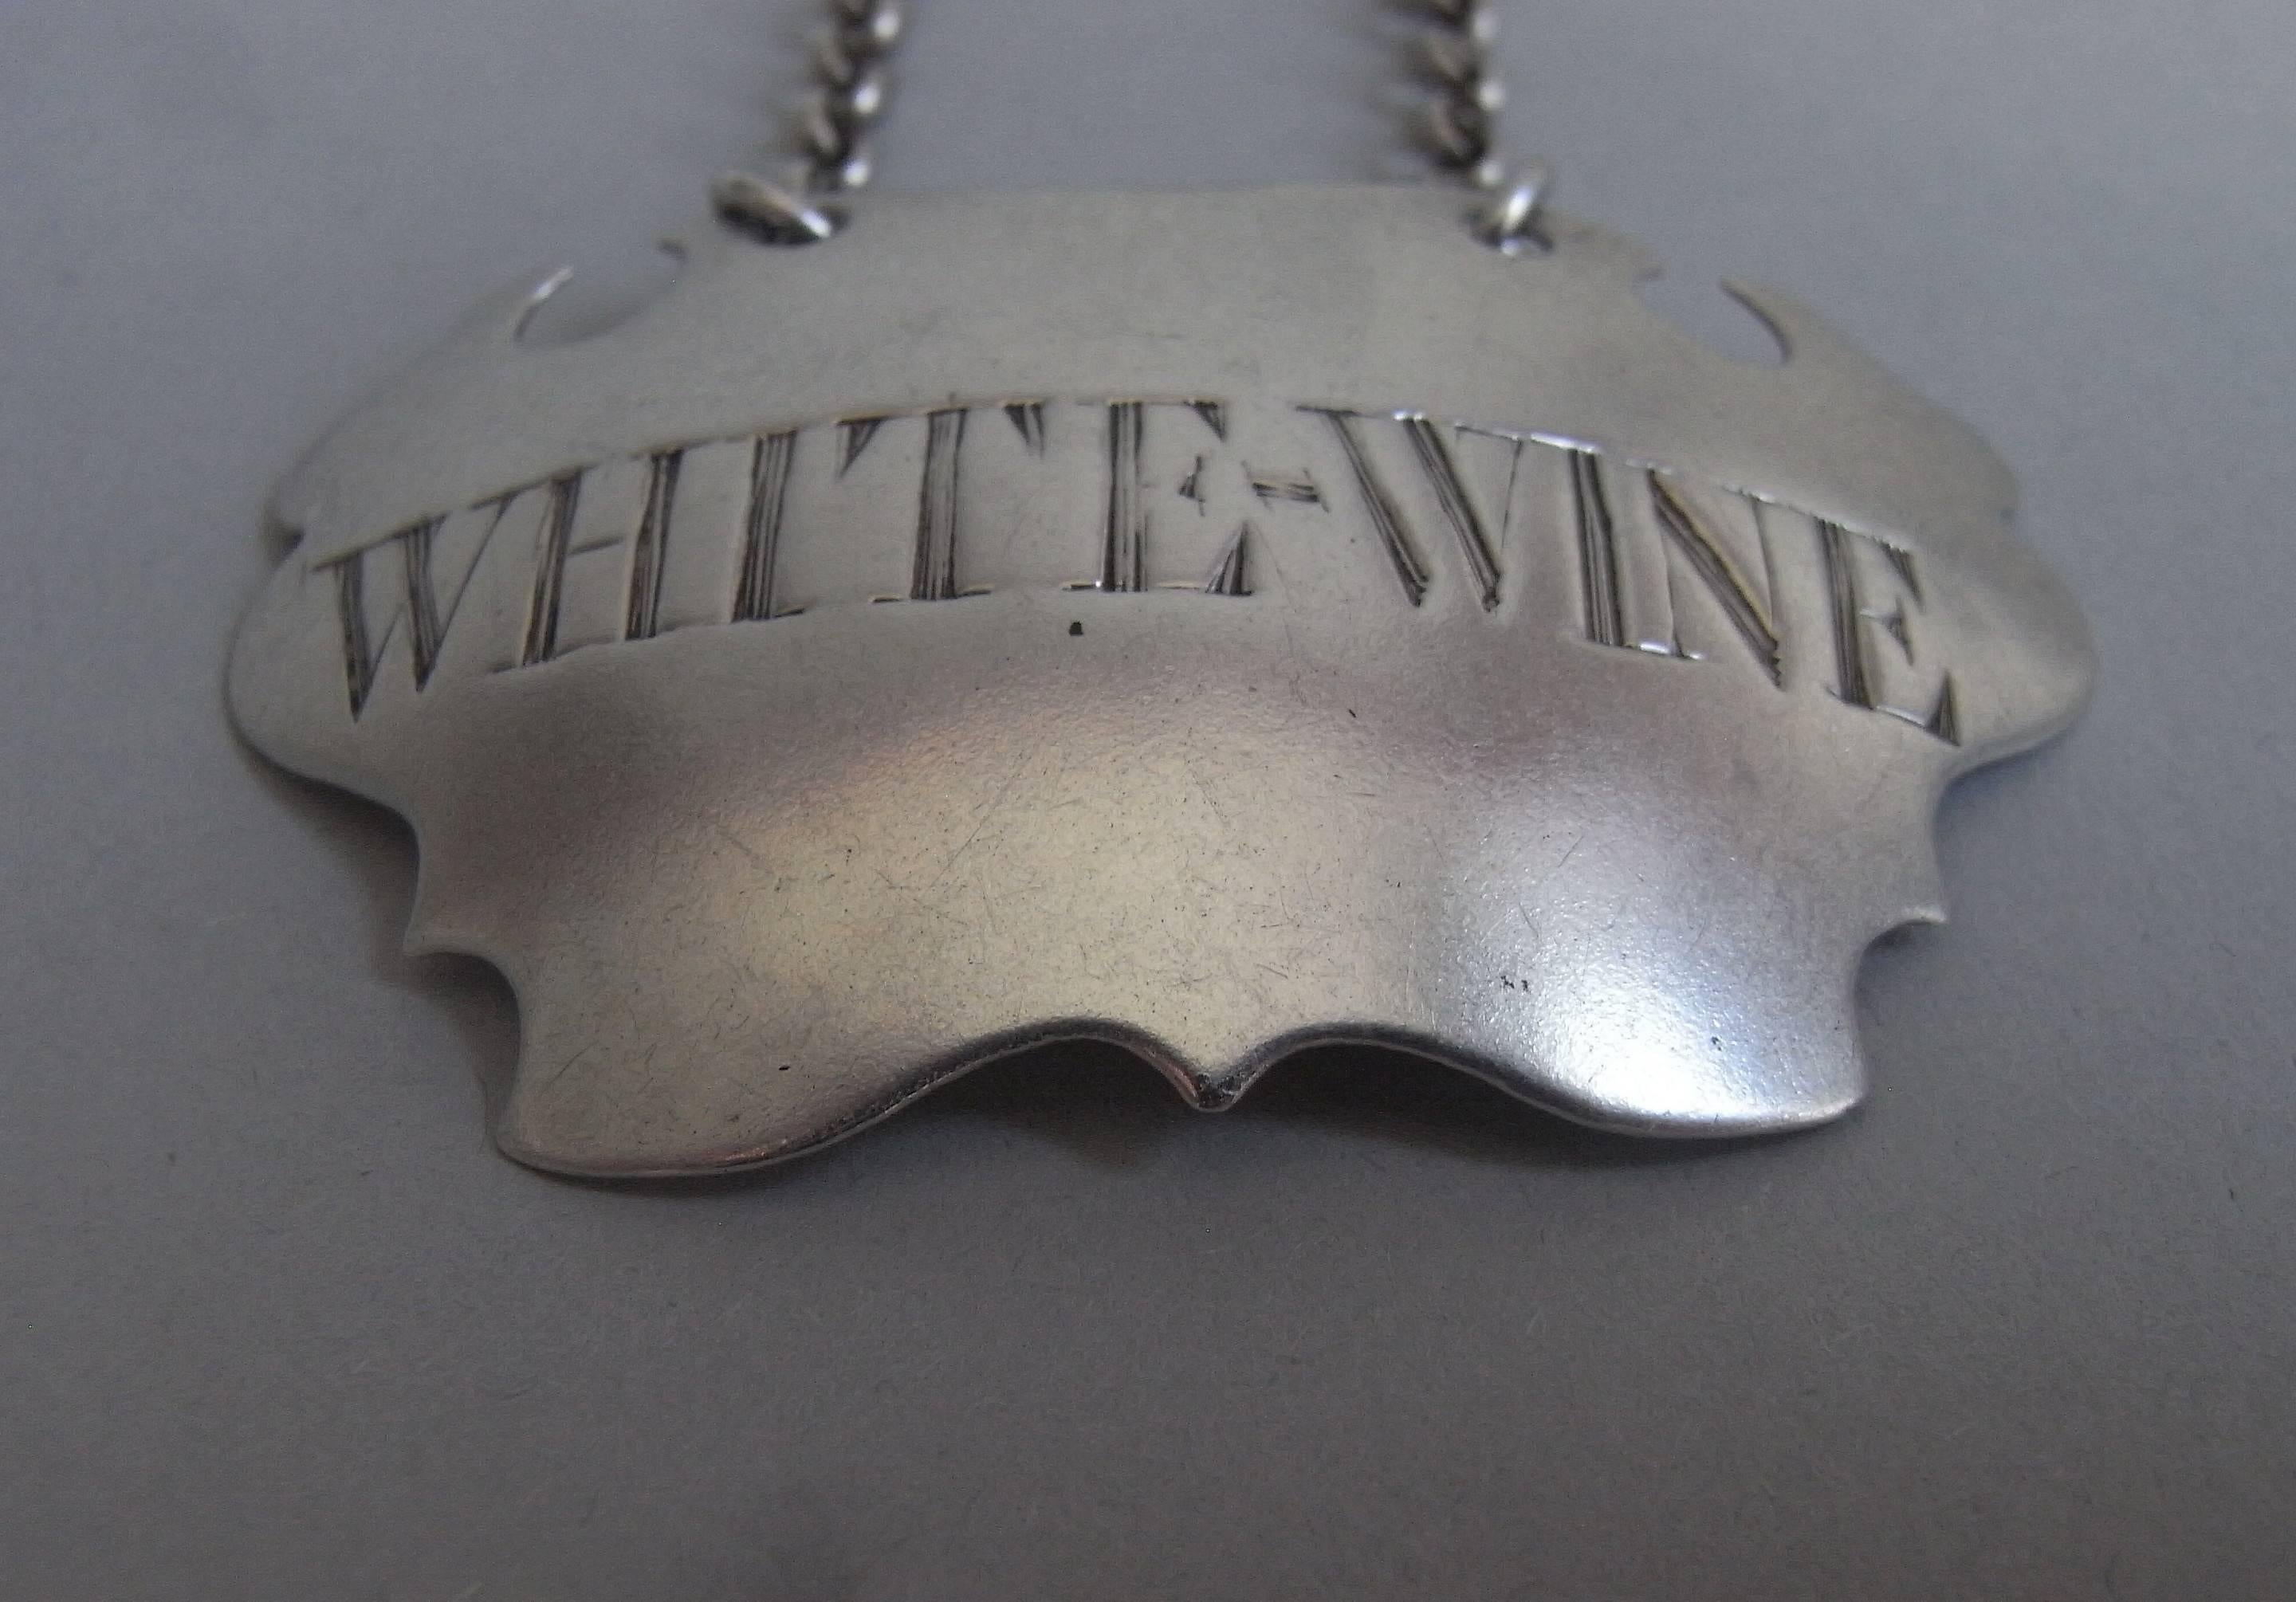 The wine label is of the plain escutcheon style and is engraved for WHITE WINE. This piece is in excellent condition and is very well marked. 

Measures: Length: 2.1 inches, 5.25cm. 
Width: 1.45 inches, 3.63cm.